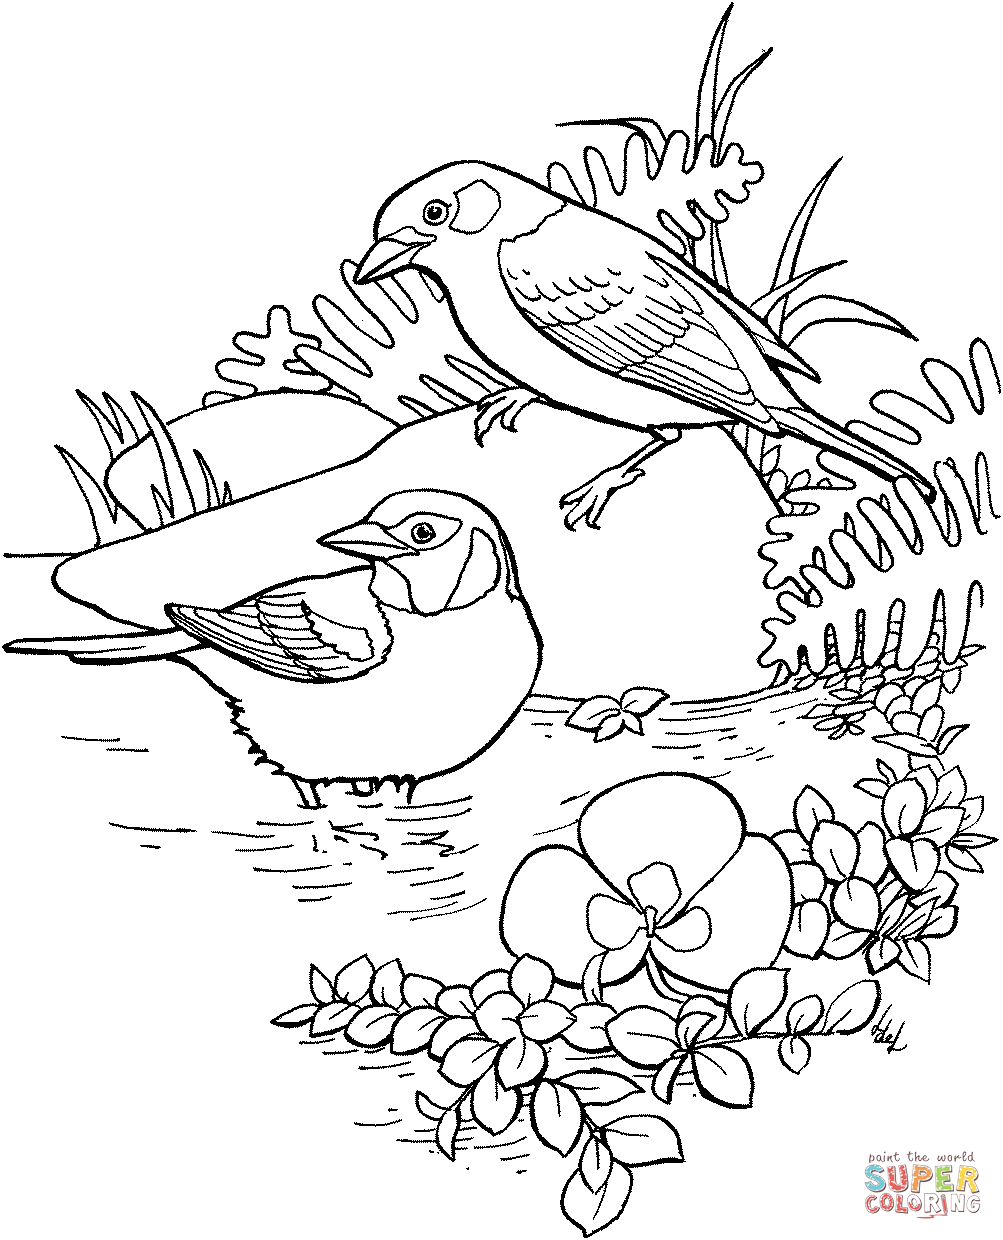 Scarlet Tanager coloring #9, Download drawings